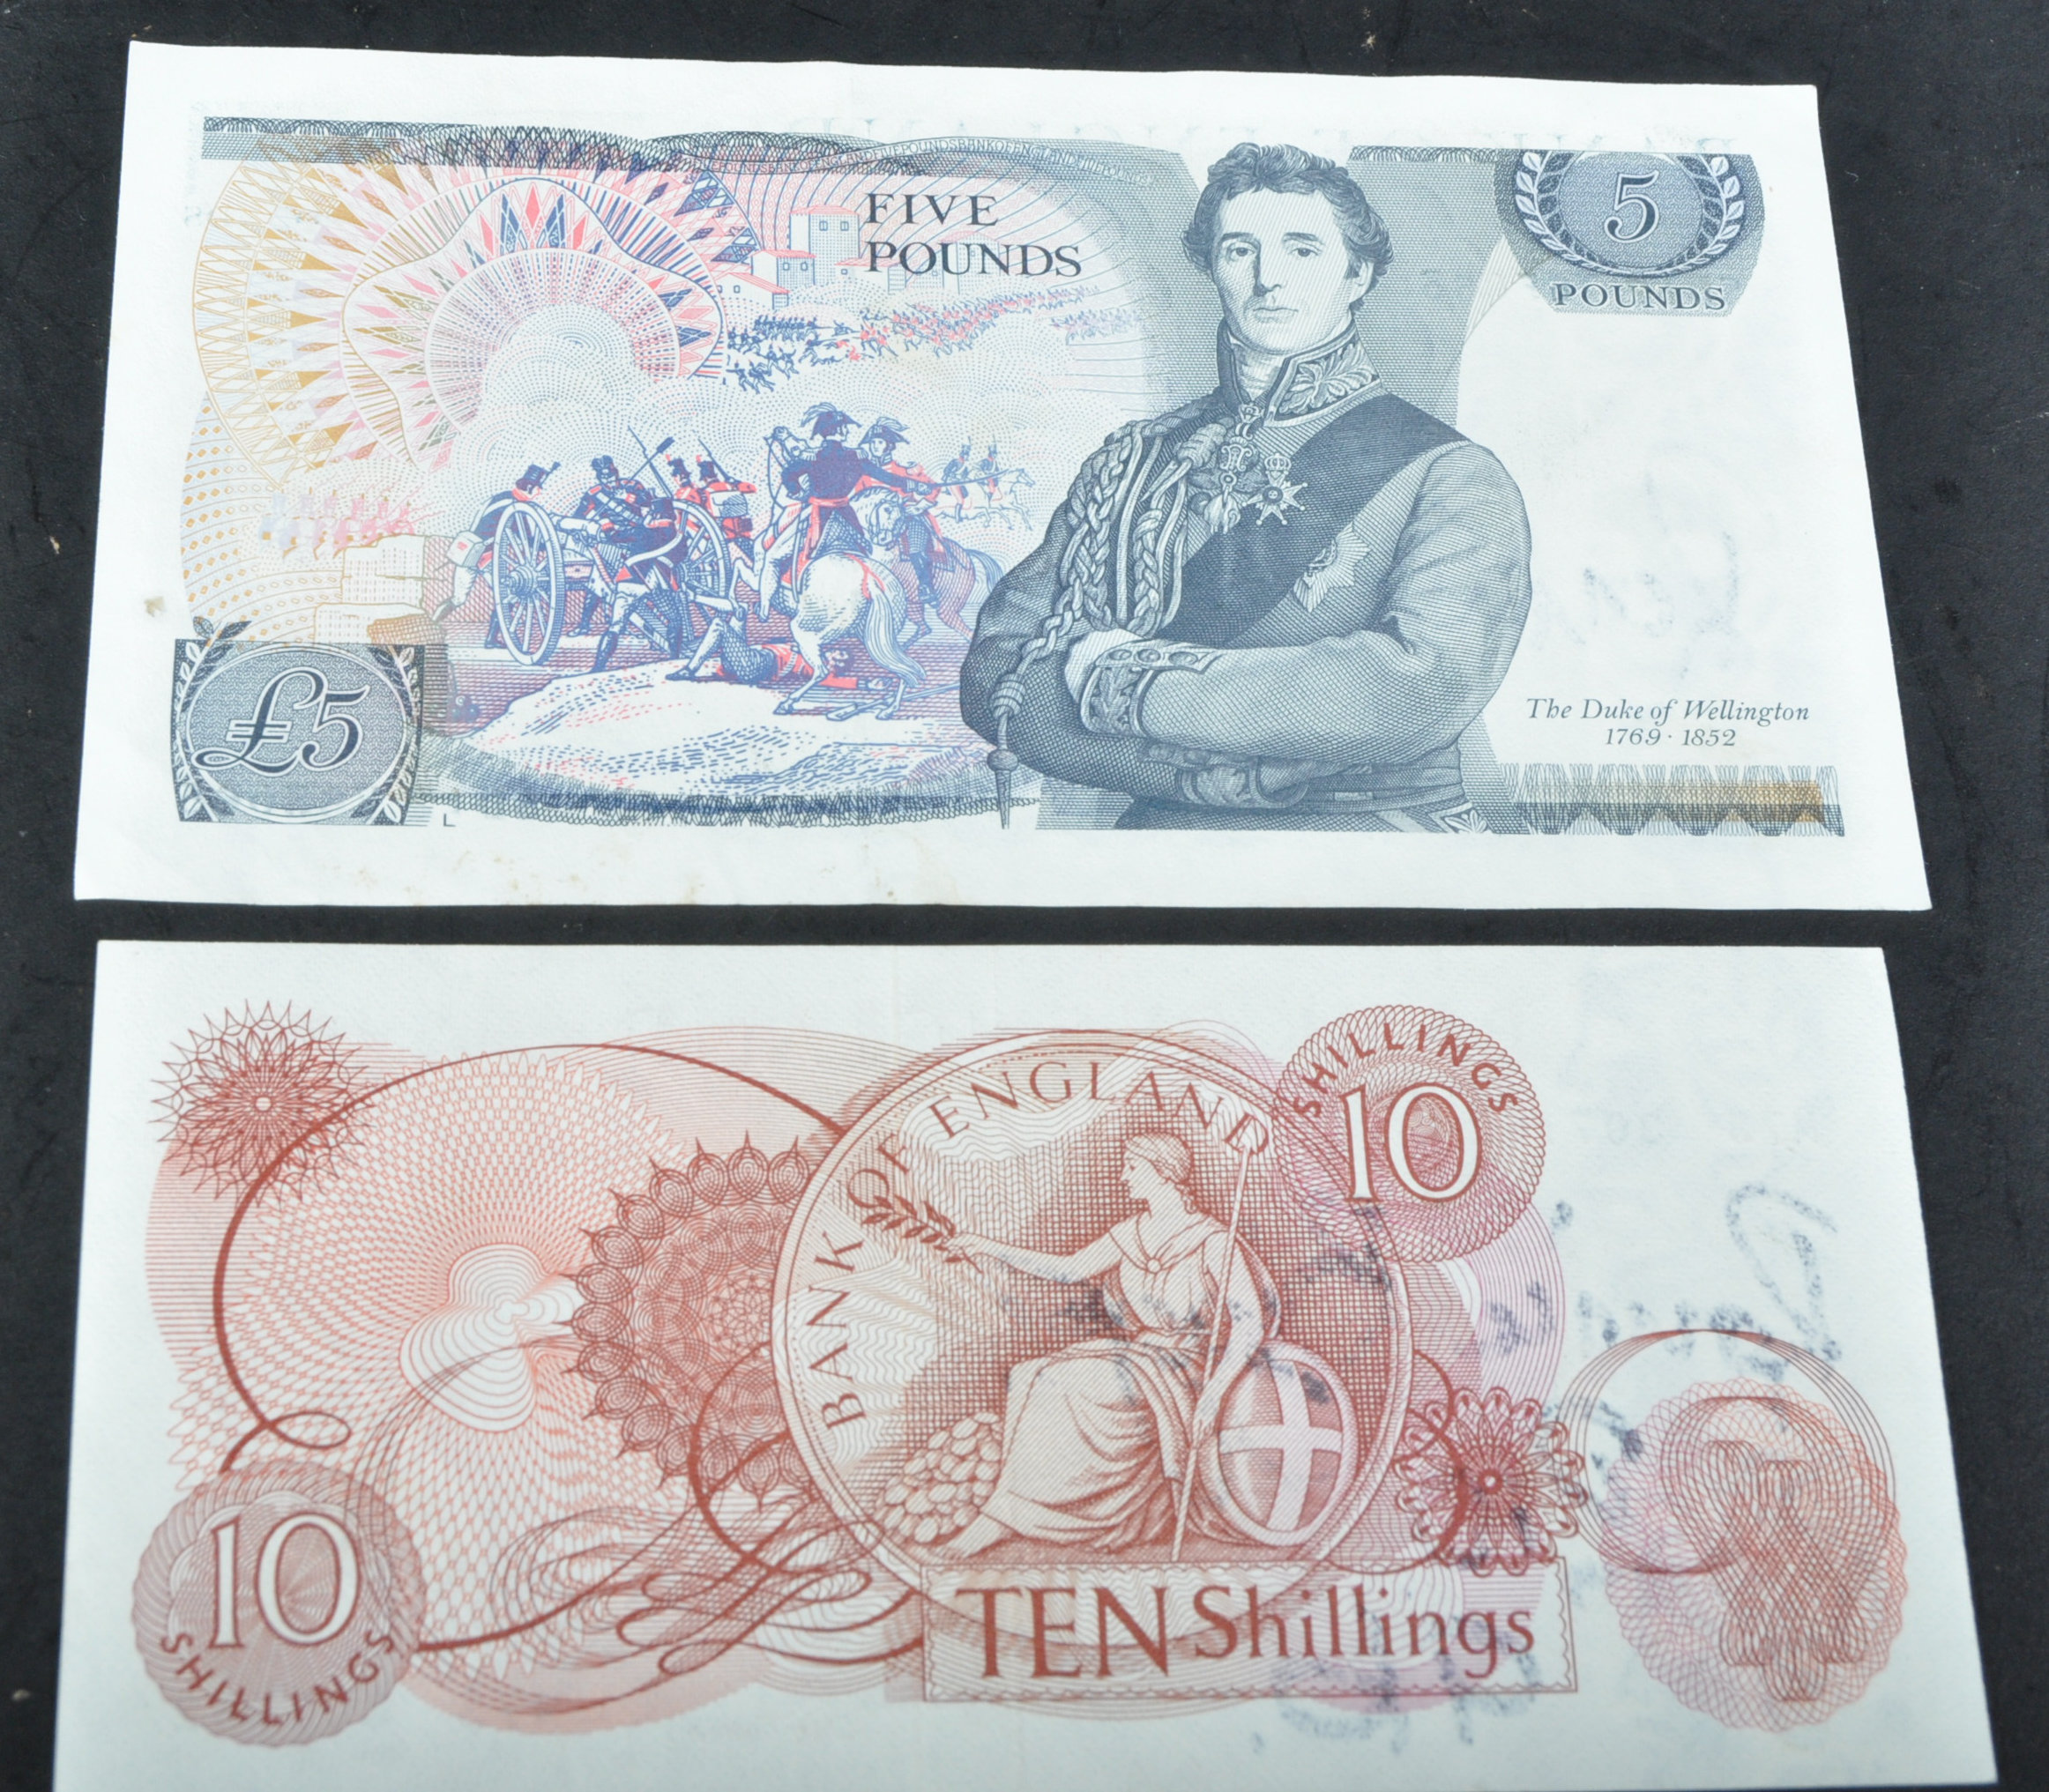 GREAT TRAIN ROBBERY - RONNIE BIGGS SIGNED BANK NOTES - Image 5 of 6